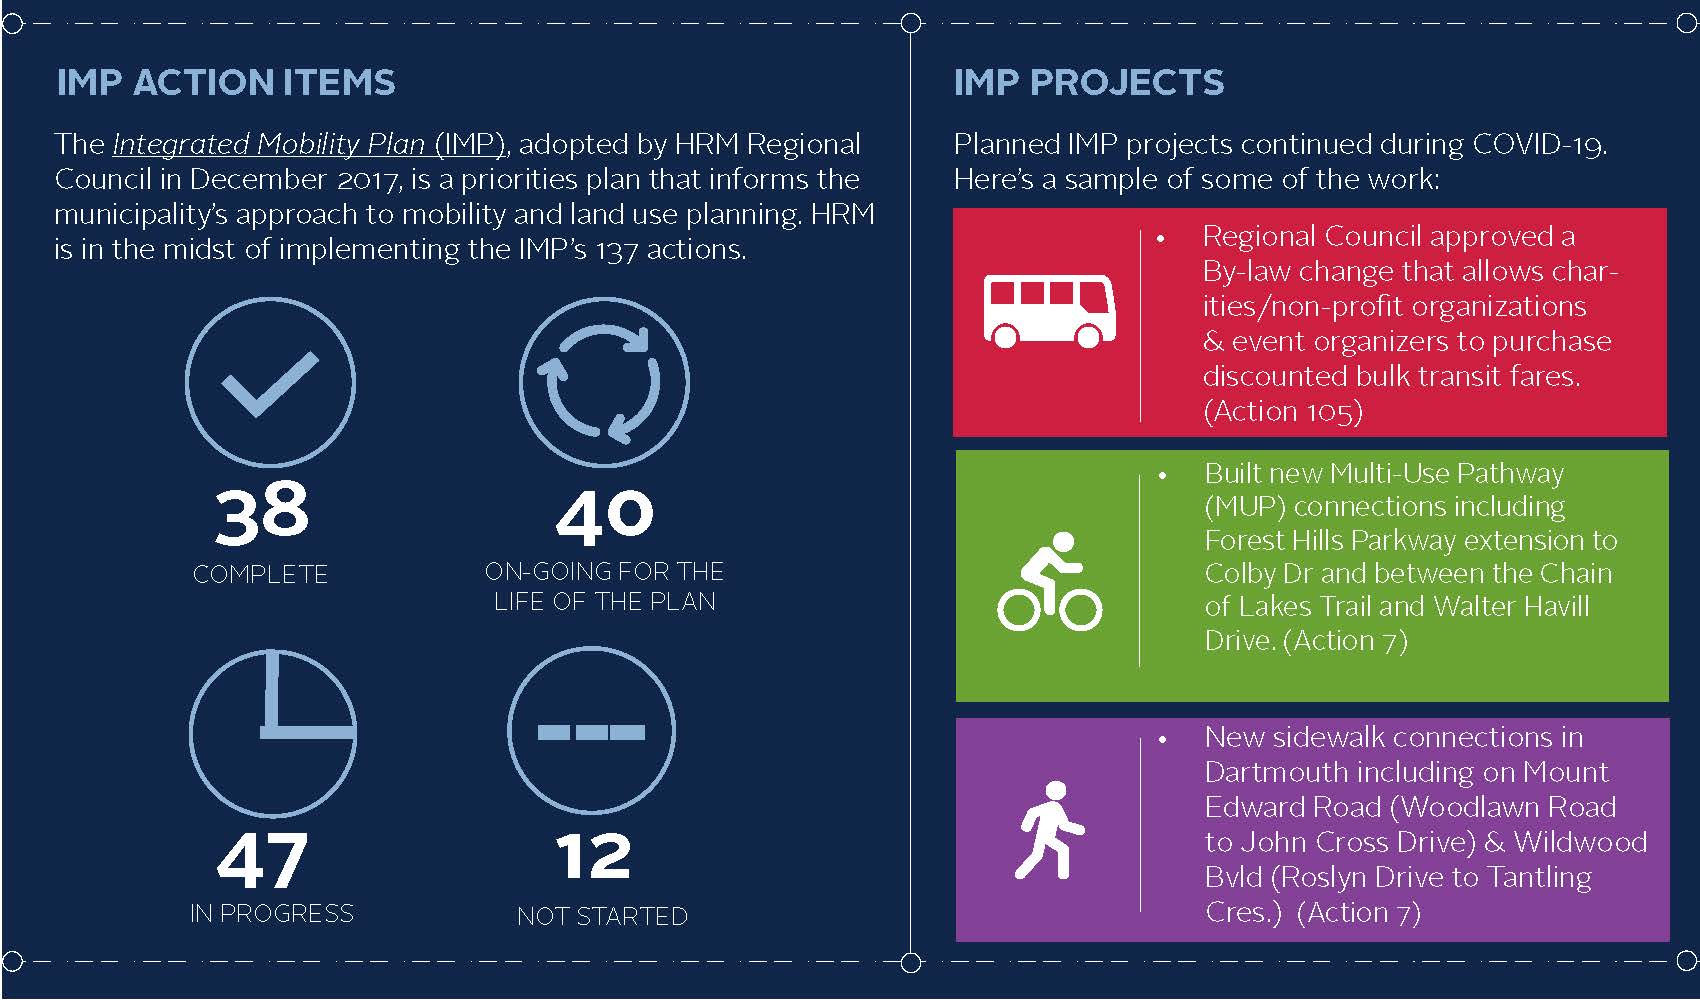 Graphic showing IMP Action Items & a sampling of projects